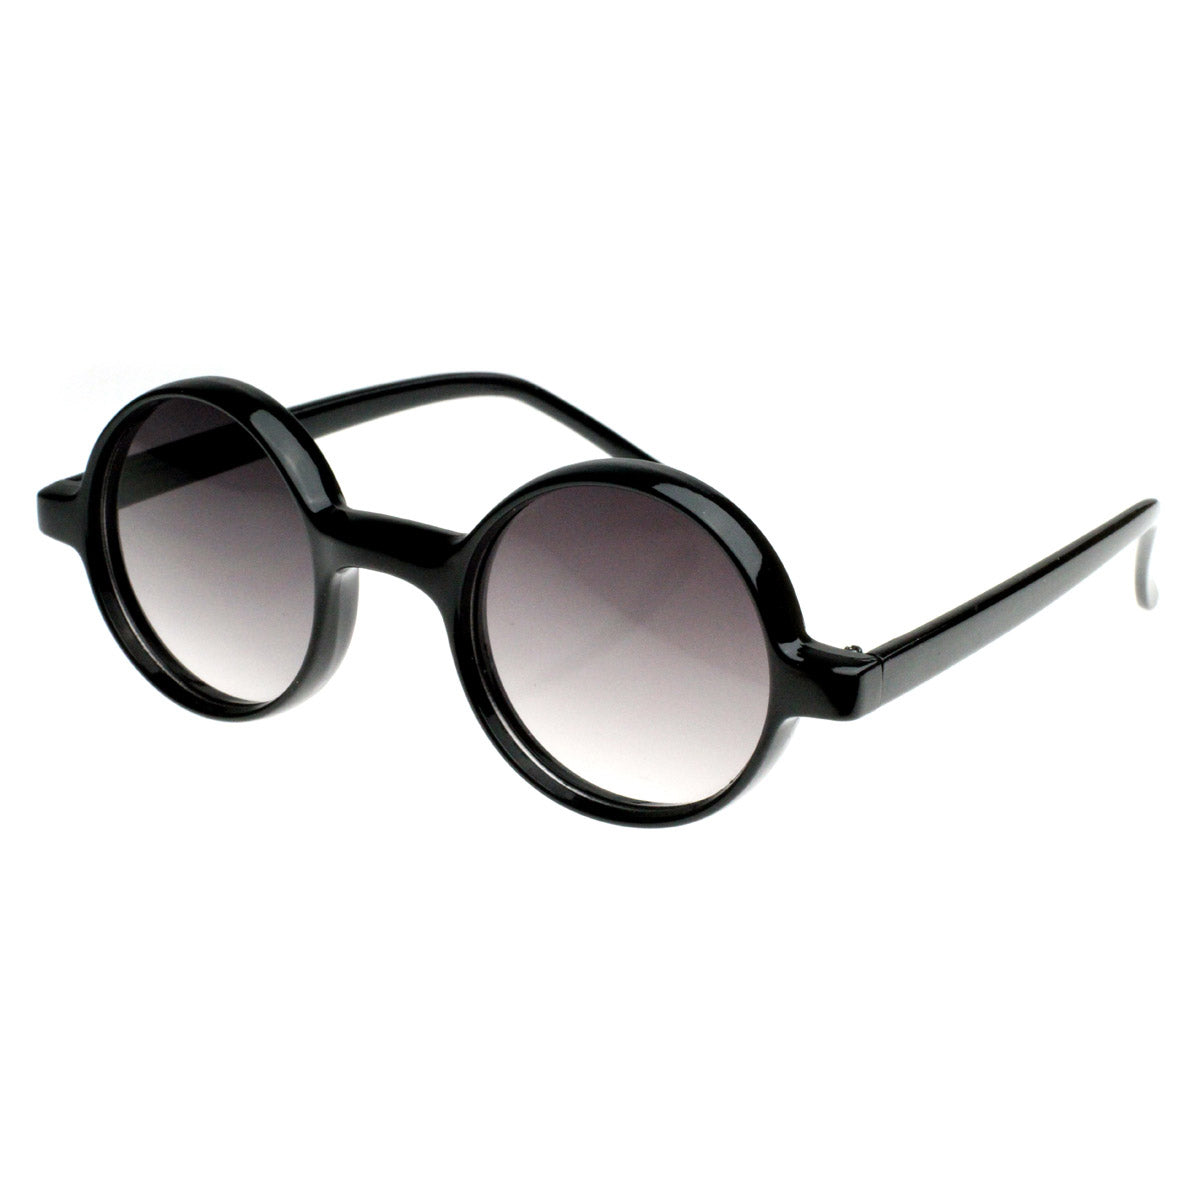 Spectacles Vintage Inspired Small Round Retro Circle Sunglasses ...